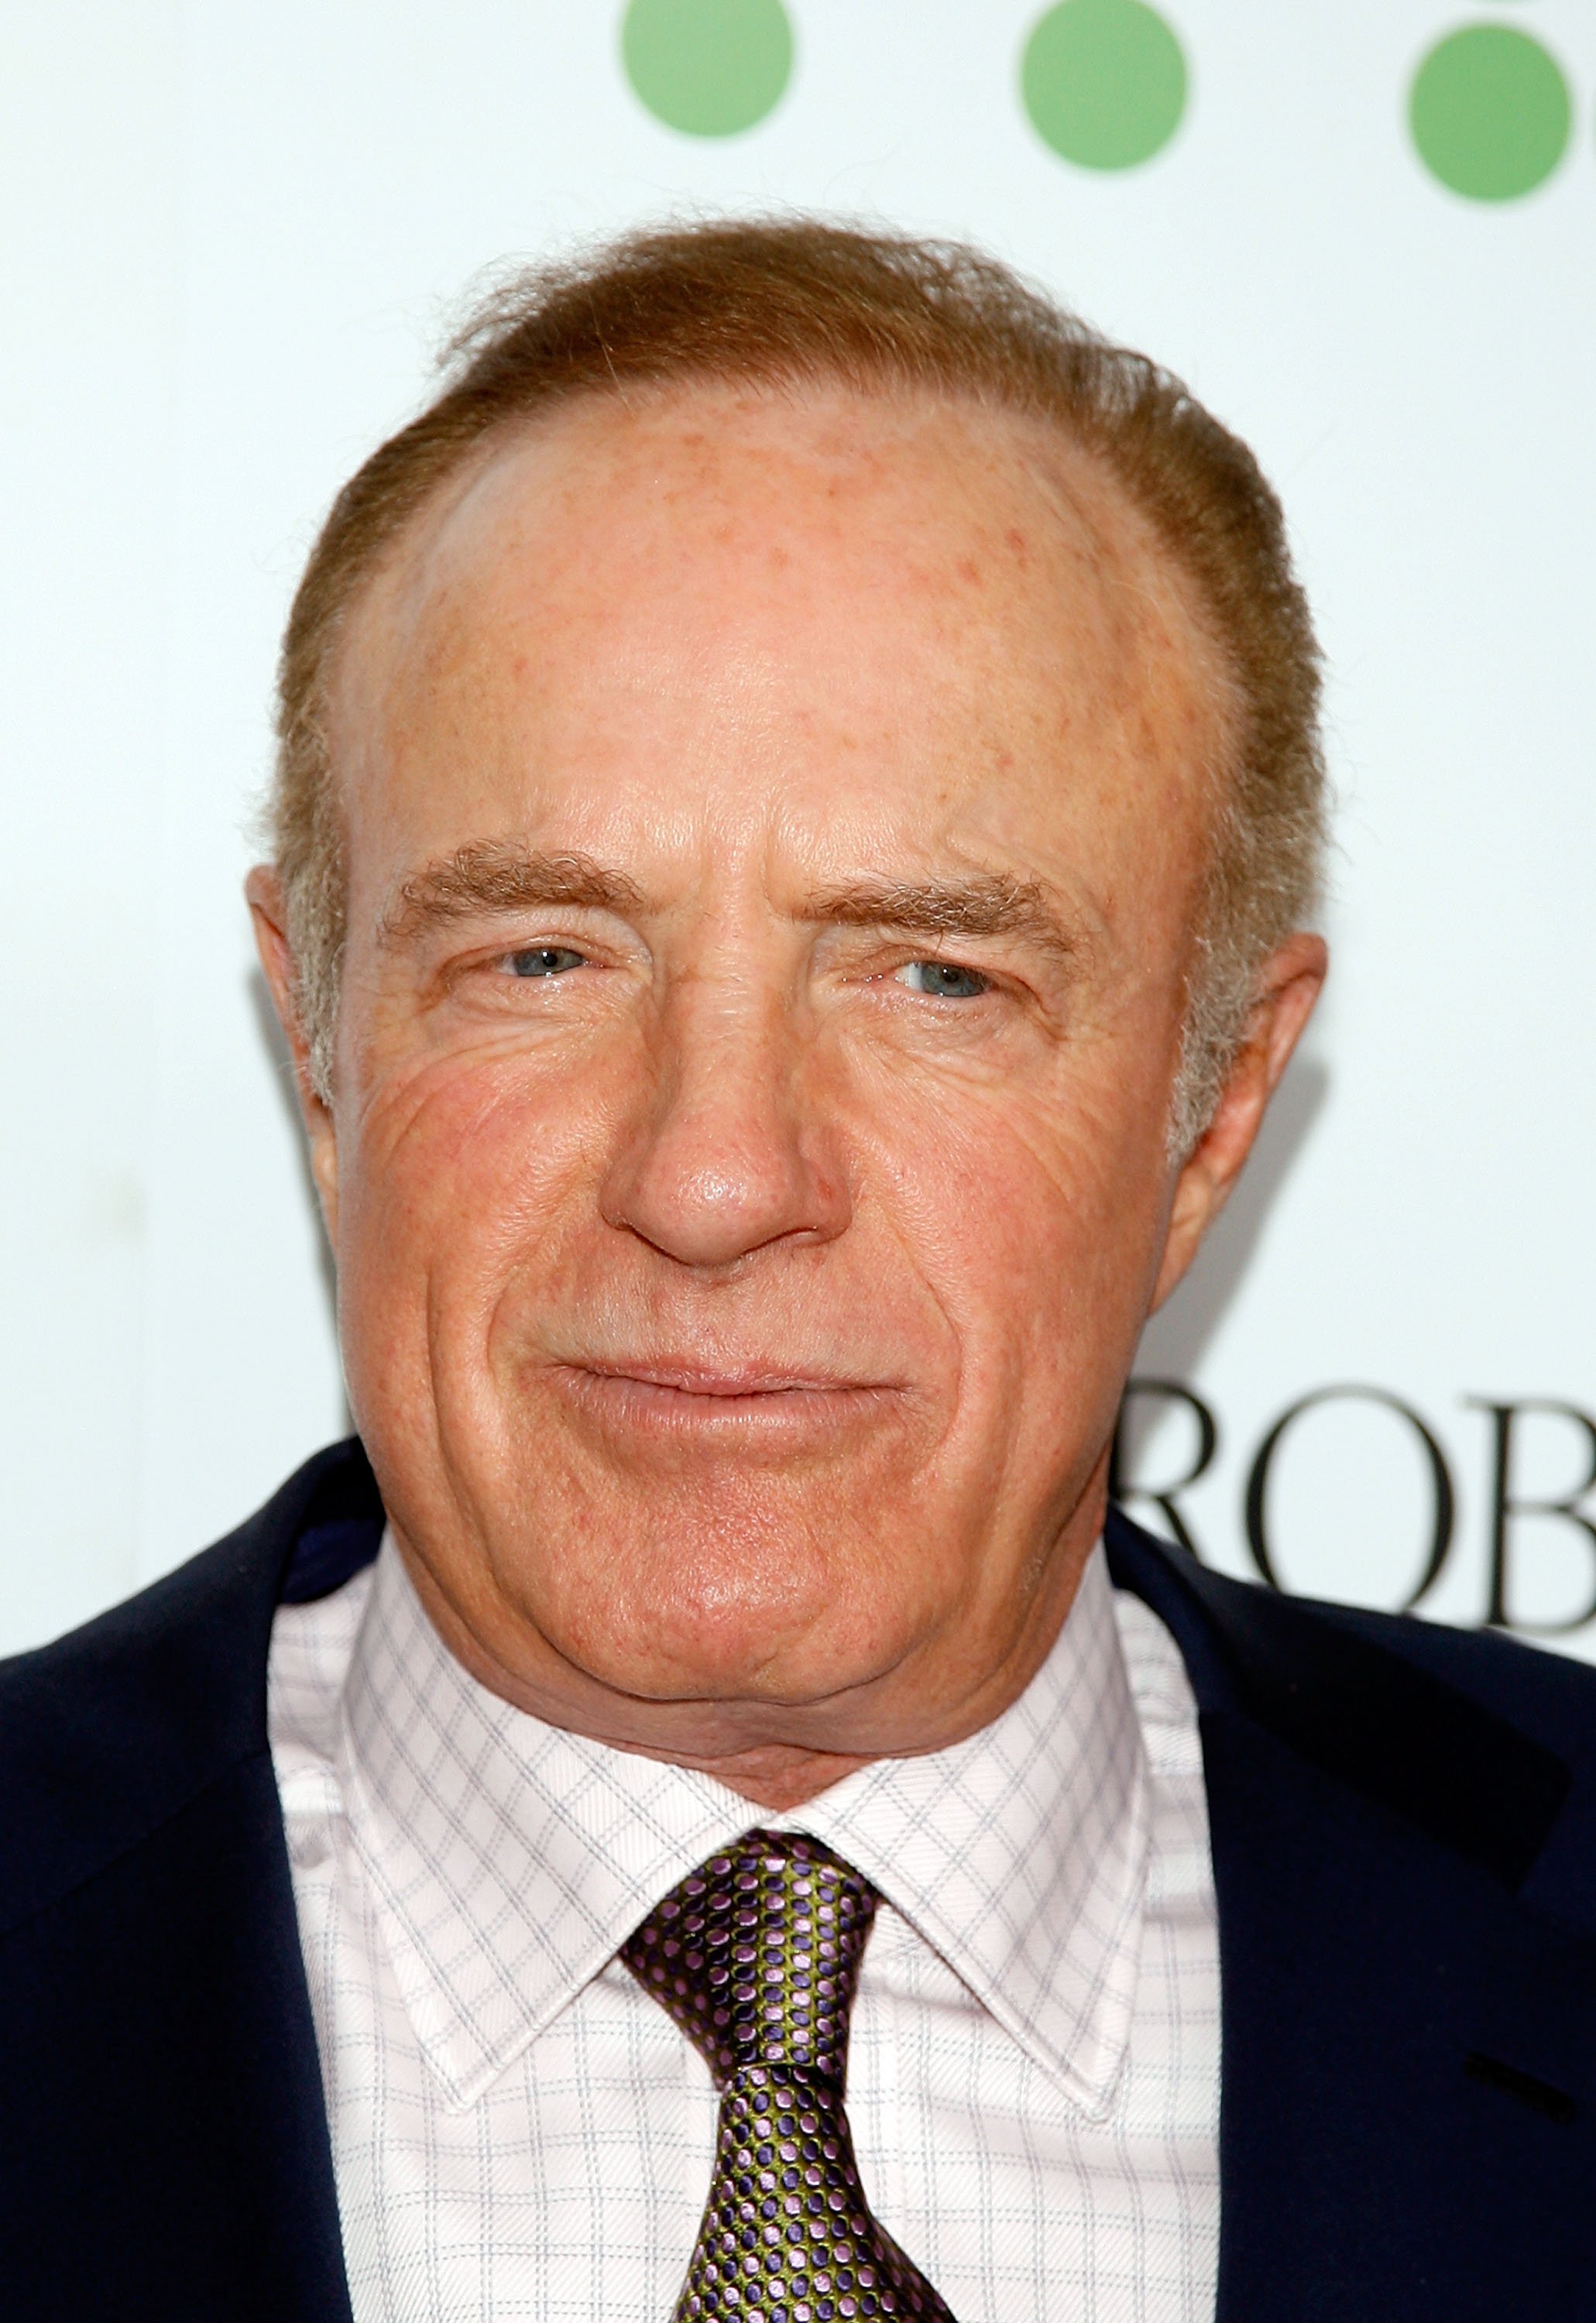 Actor James Caan arriving to Hollywood Life Magazine's 9th annual Young Hollywood Awards at the Music Box at the Fonda April 22, 2007 in Los Angeles, California. / Source: Getty Images